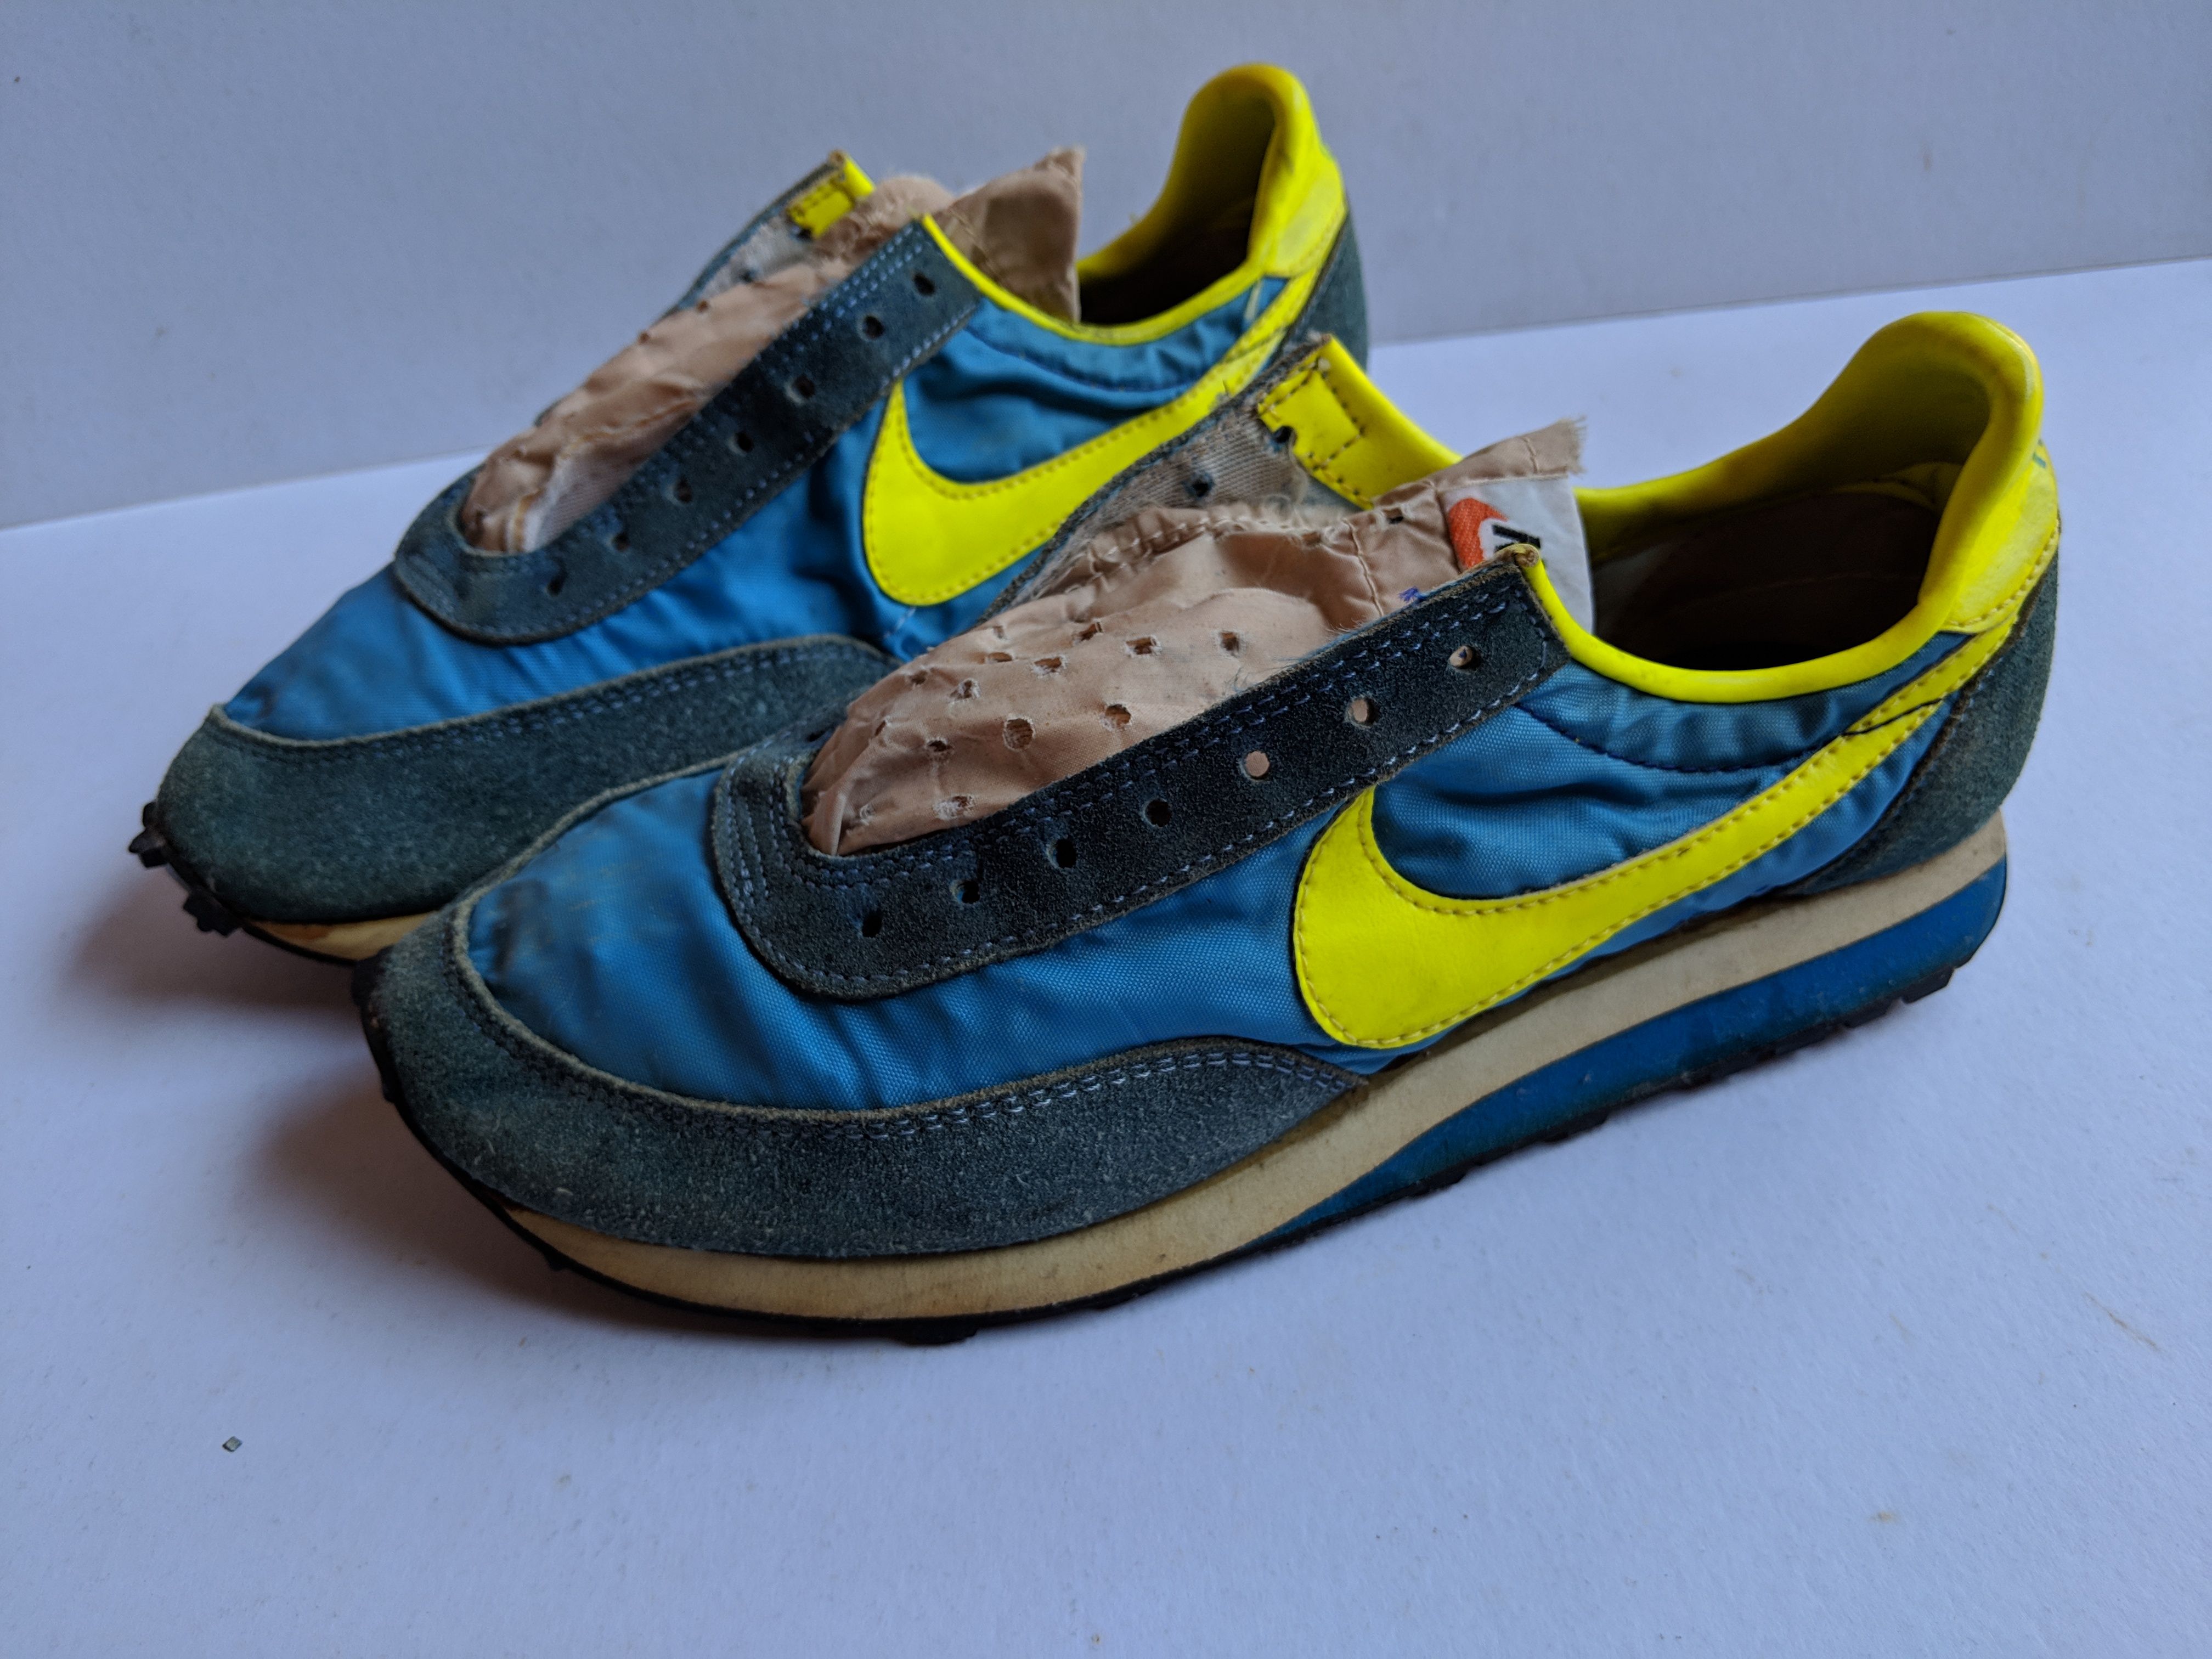 Nike Rarely vintage early model 70s nike elite sneakers shoes made in usa/collector item Size US 6 / EU 39 - 1 Preview